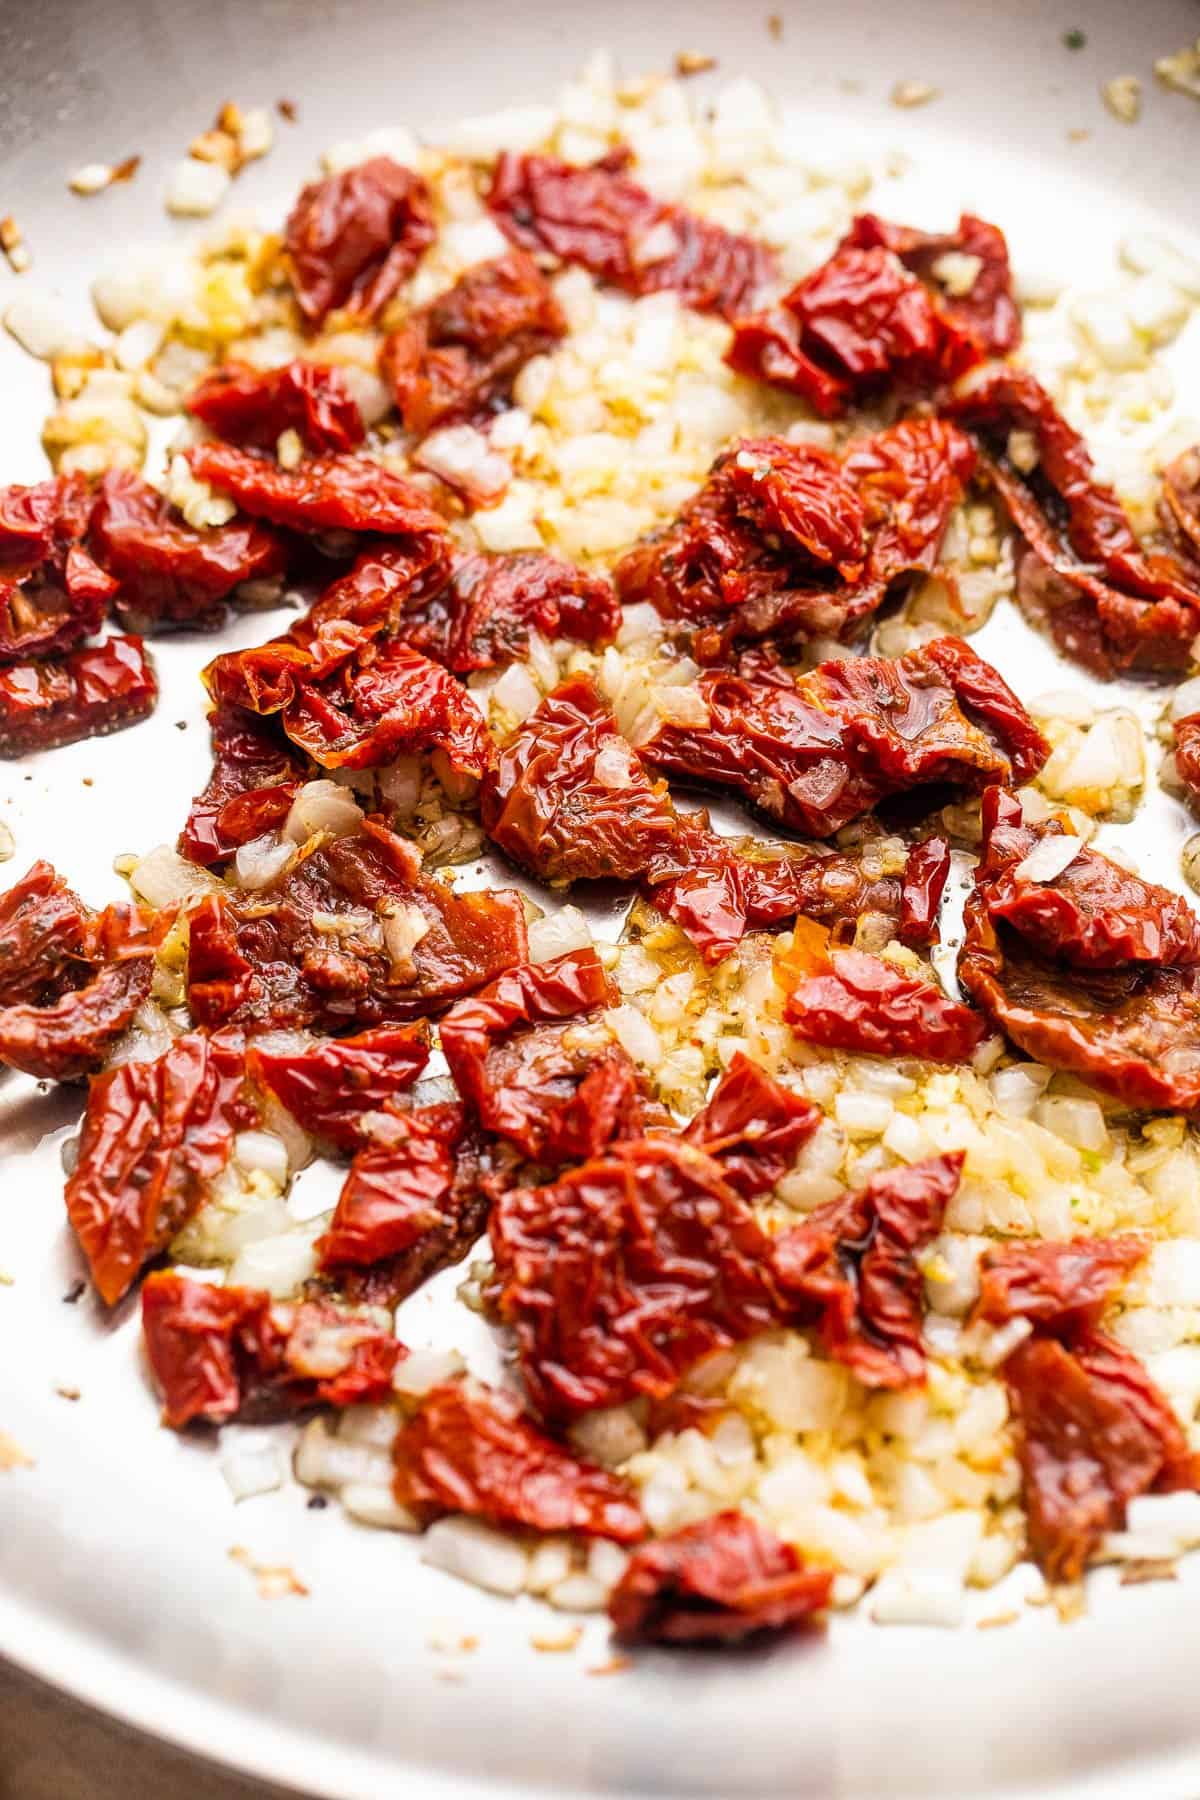 frying sundried tomatoes with diced onions and garlic.